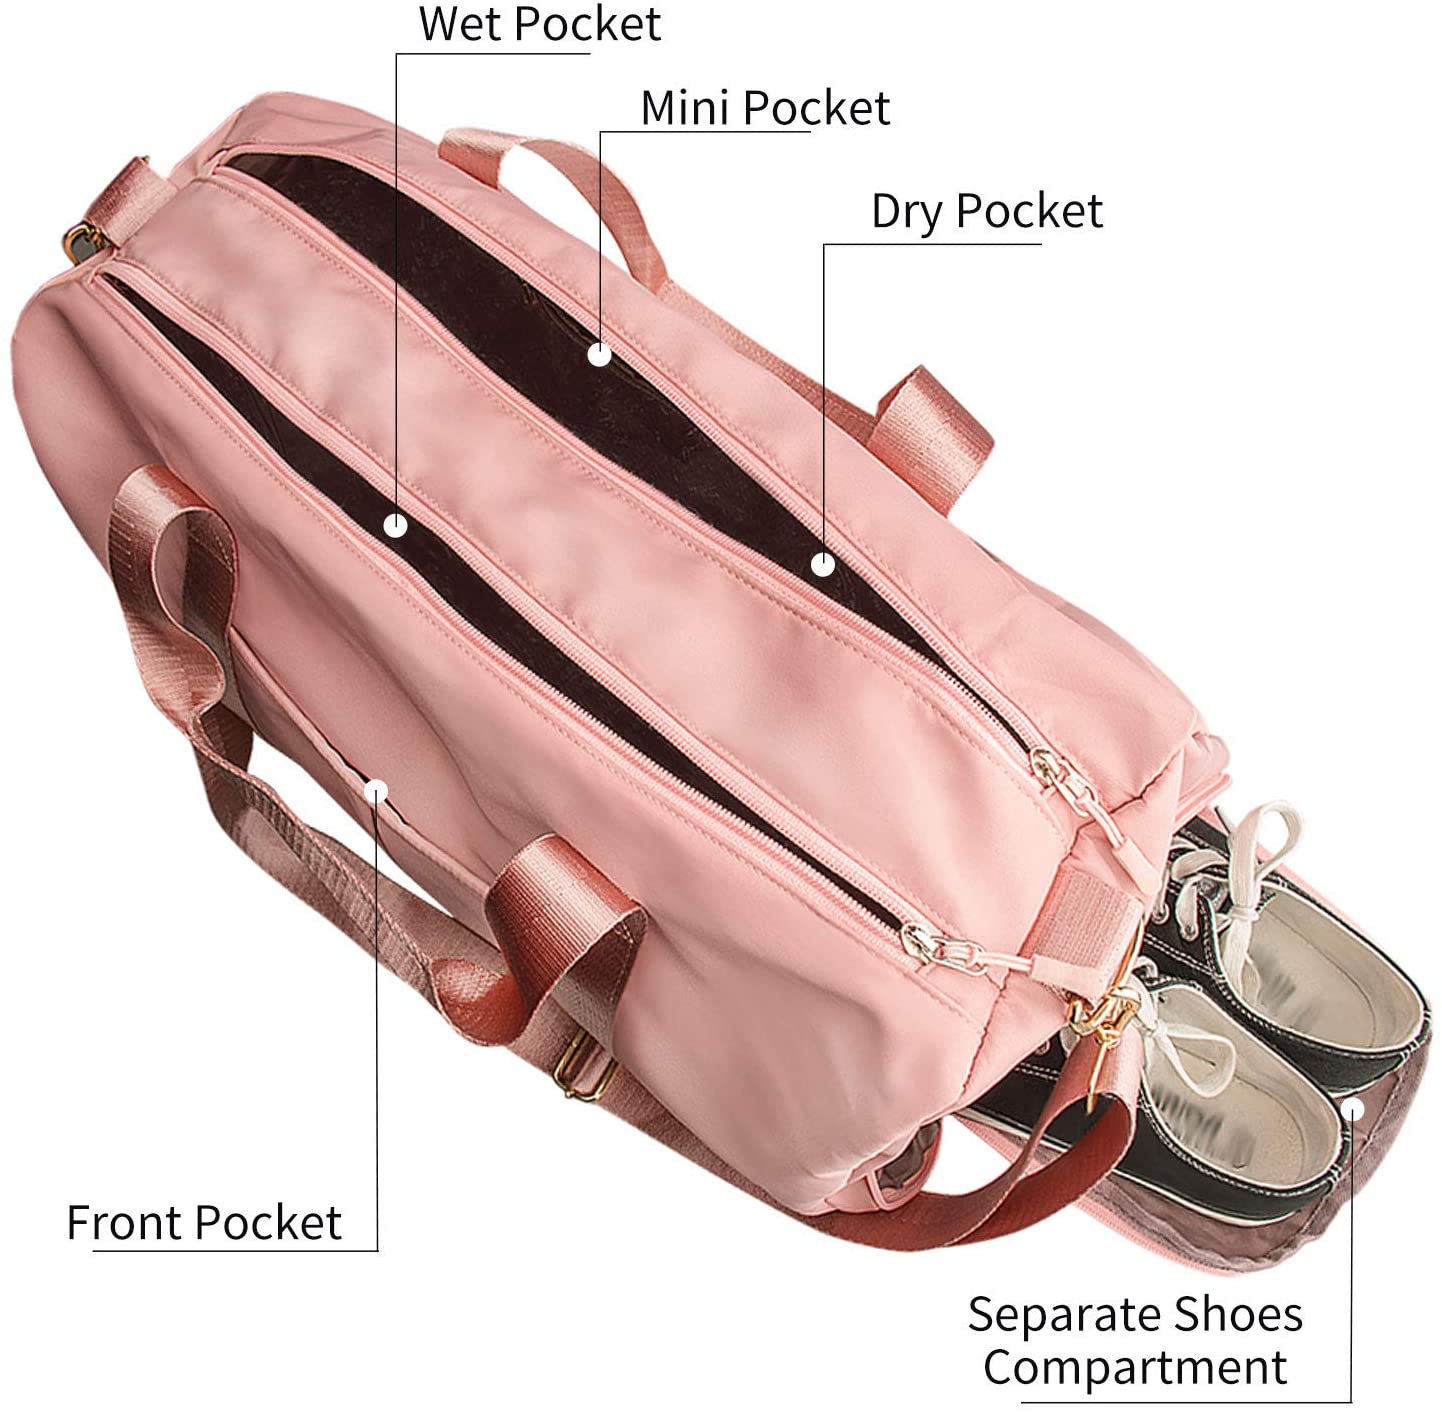 High Quality Gym Sports Bag With Shoe Compartment for Men and Women Sports Travel Gym Bag